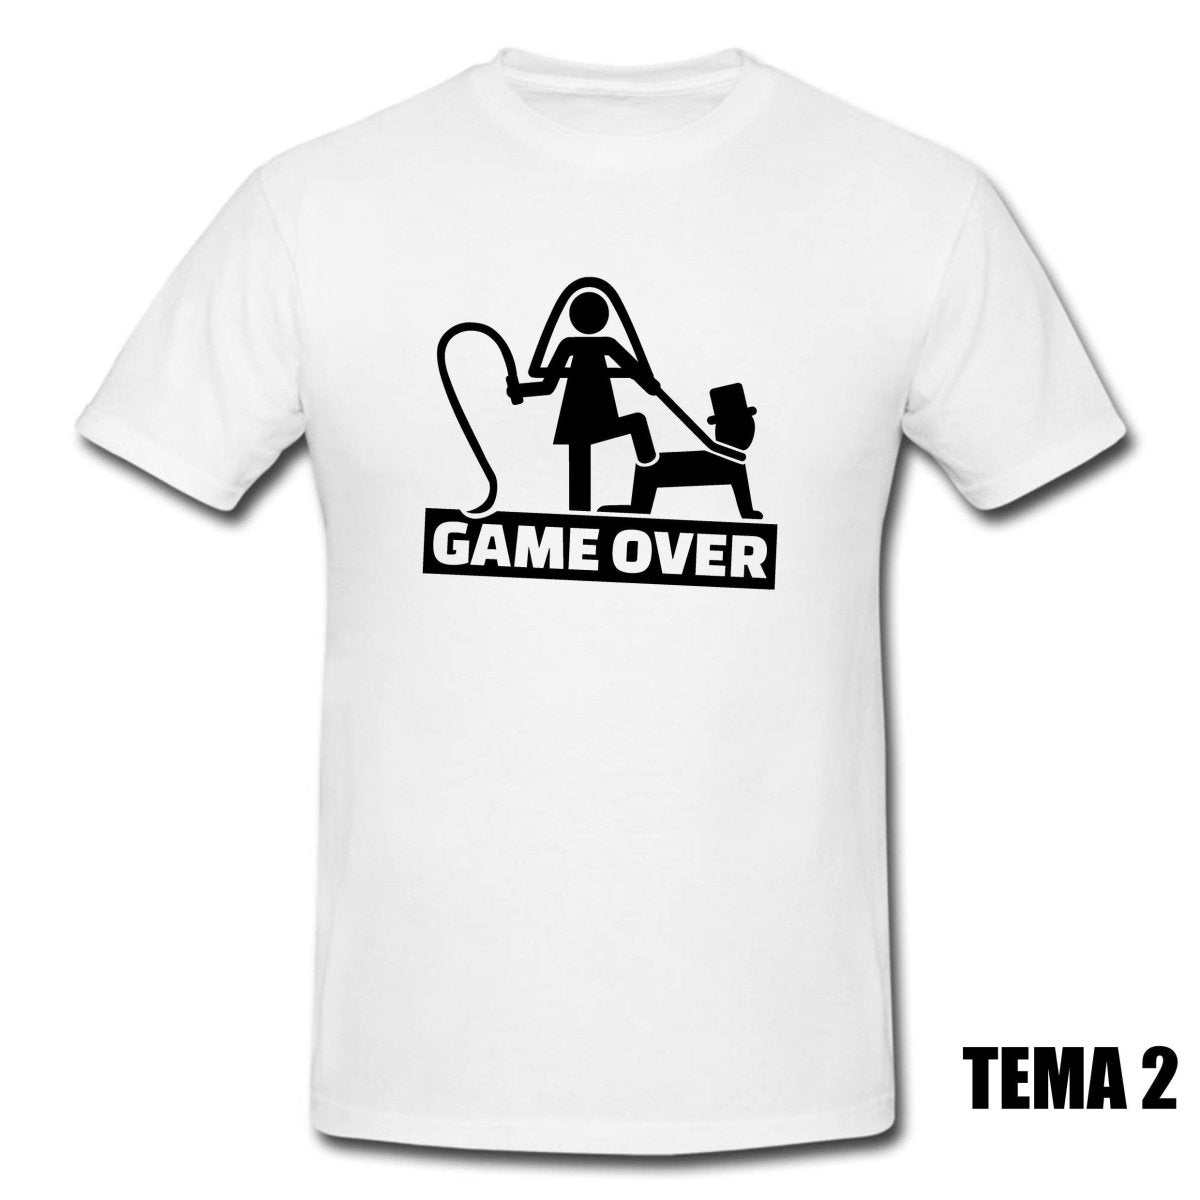 Tshirts - GAME OVER - RMCLICK